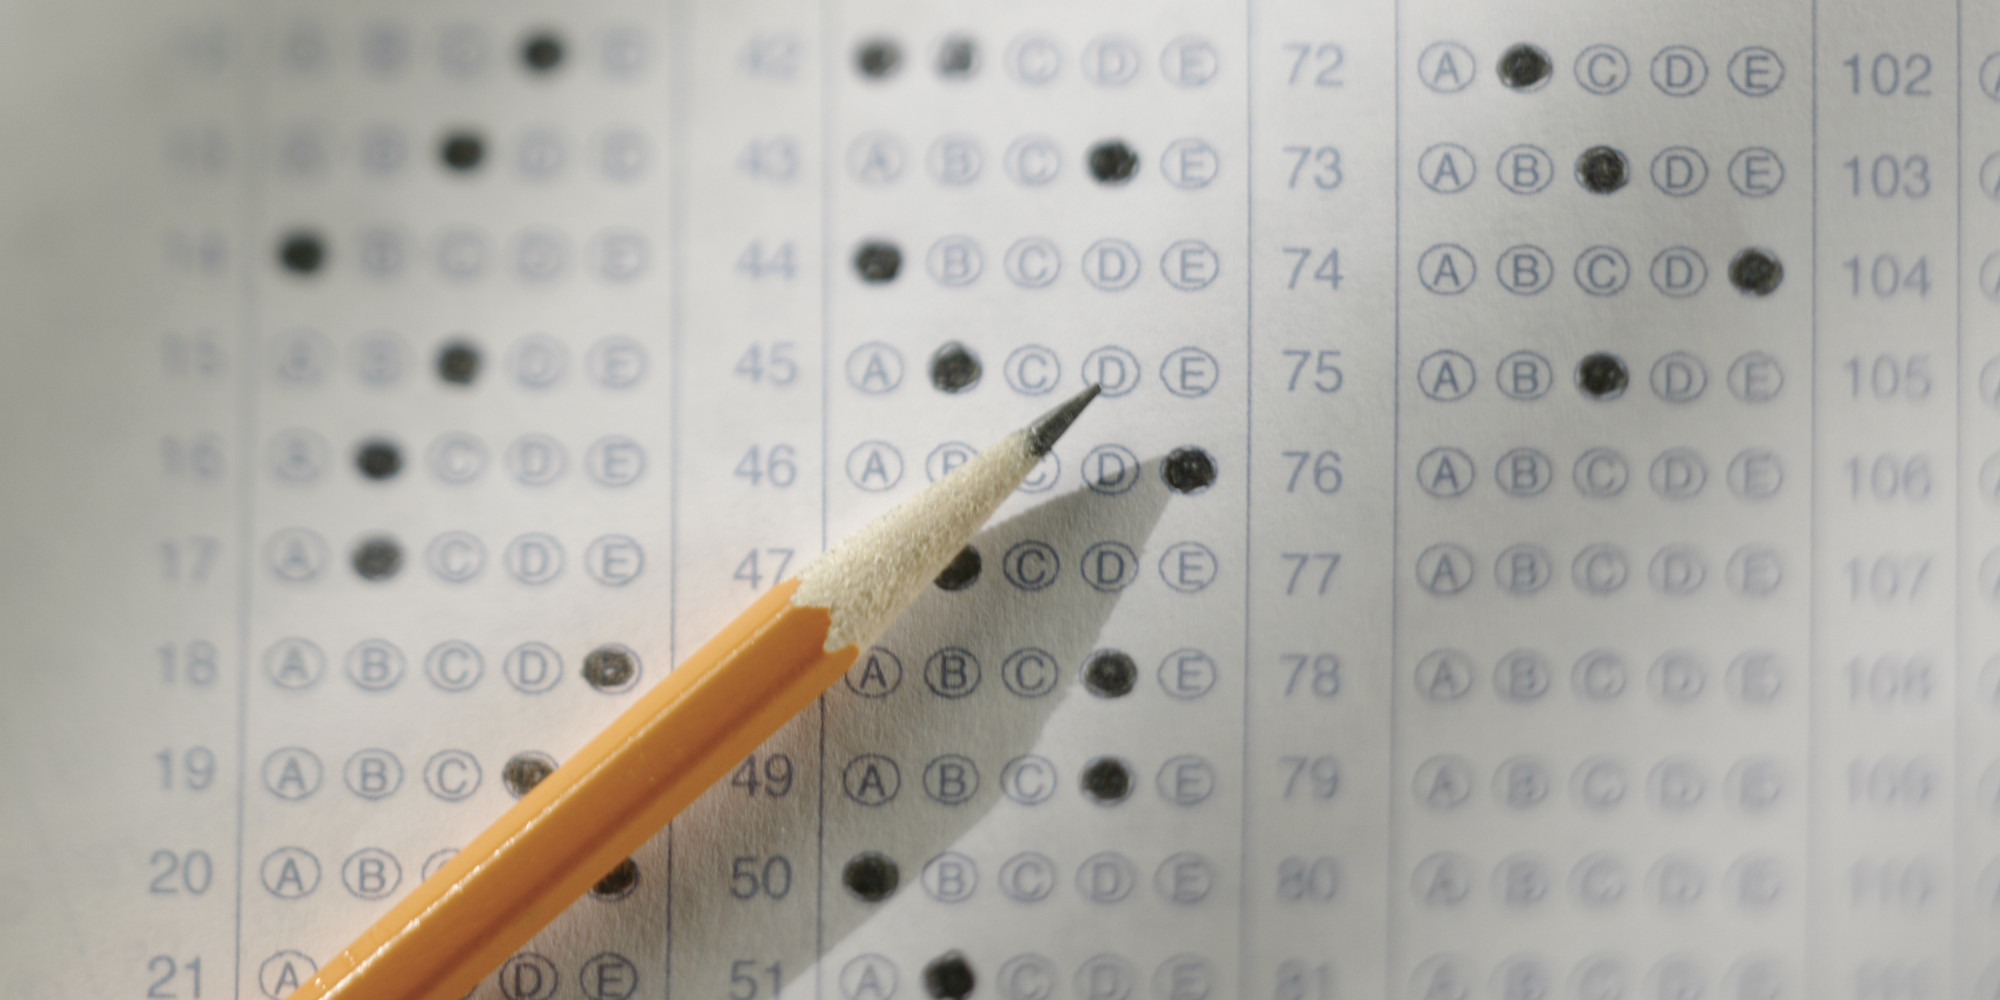 want-to-know-how-you-would-do-on-the-new-sat-students-can-now-take-free-practice-tests-huffpost